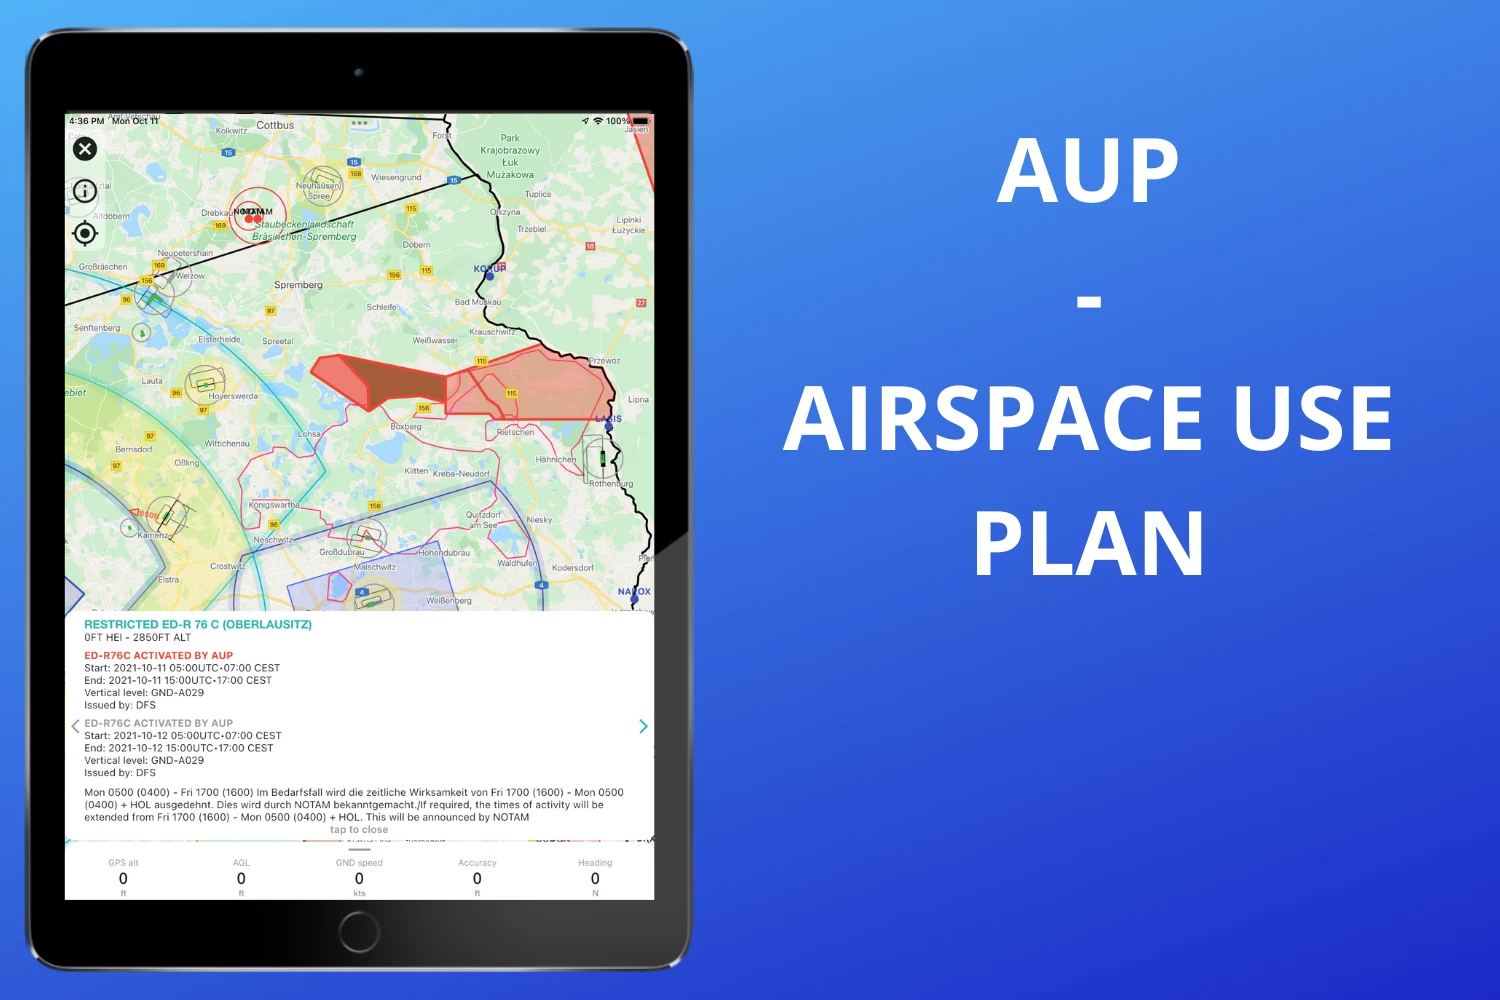 Airspace Use Plan